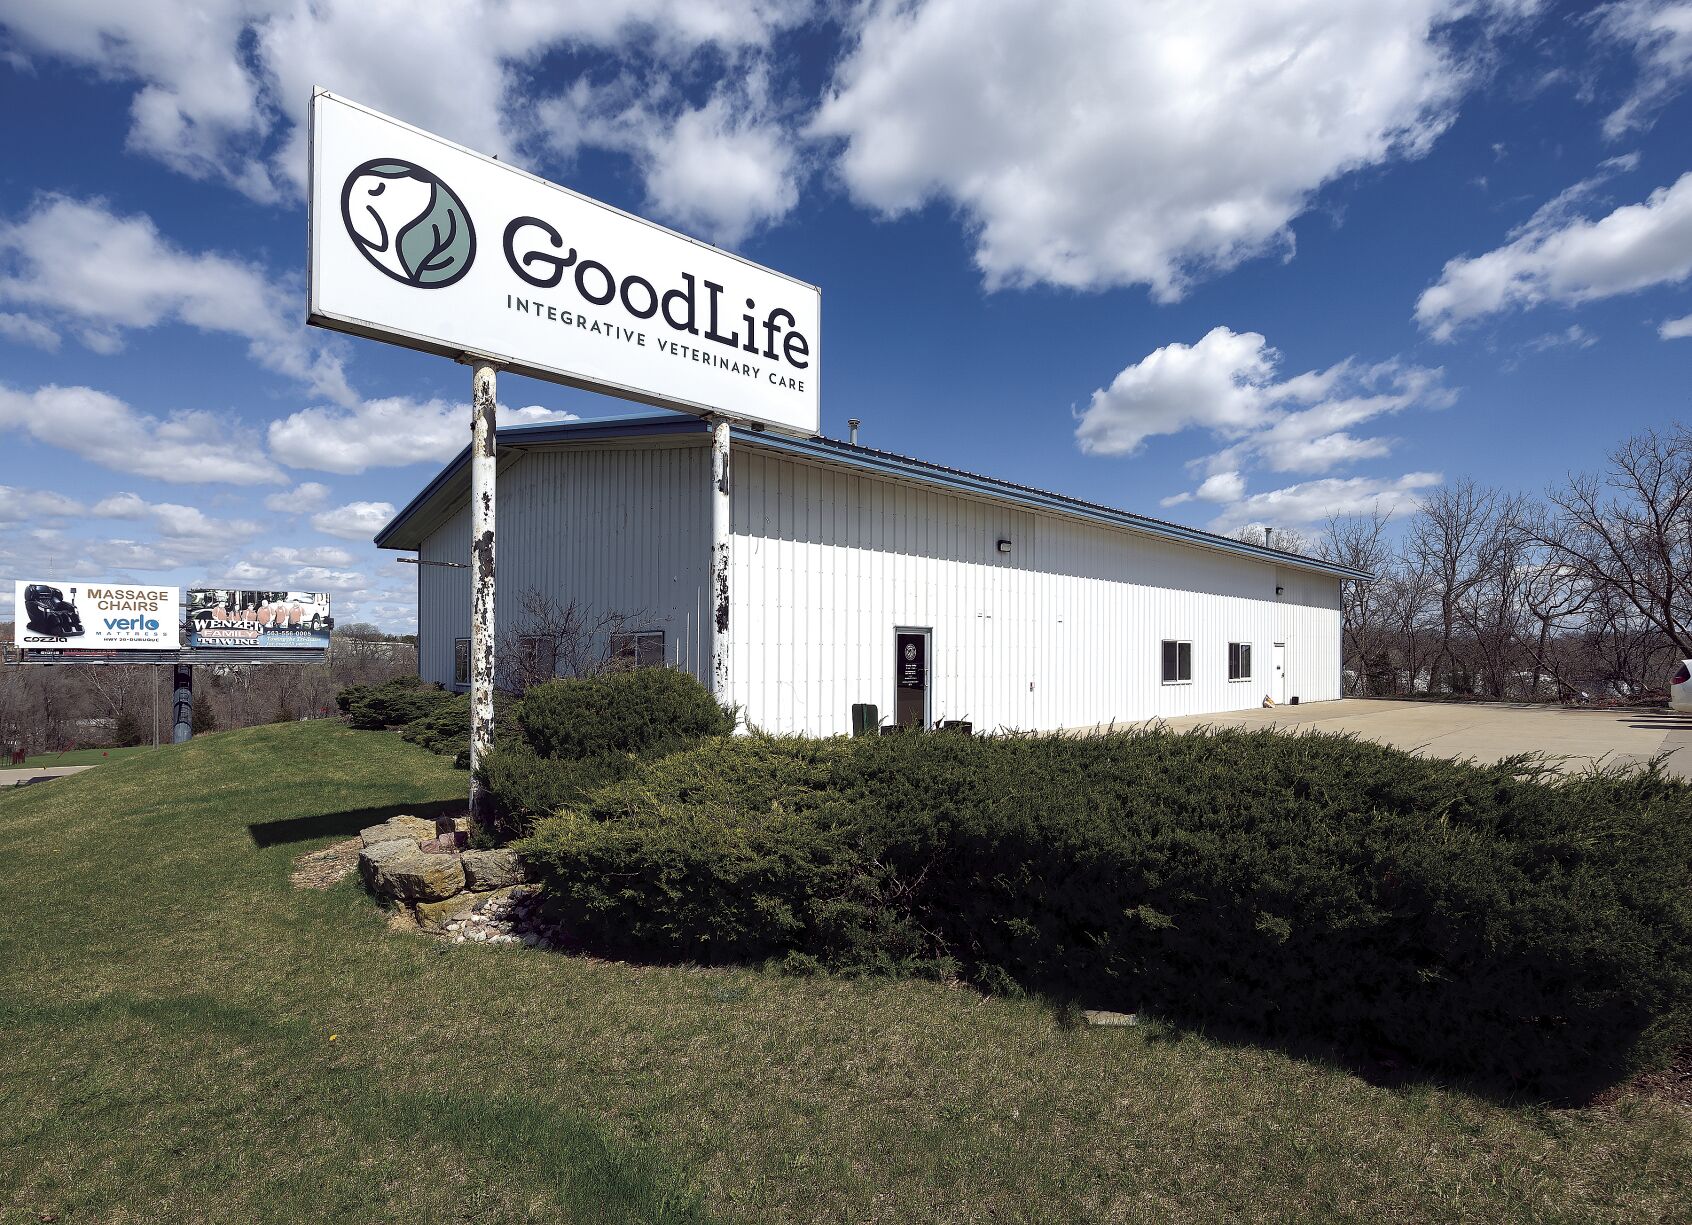 The exterior of GoodLife Integrative Veterinary Care in Dubuque.    PHOTO CREDIT: Stephen Gassman